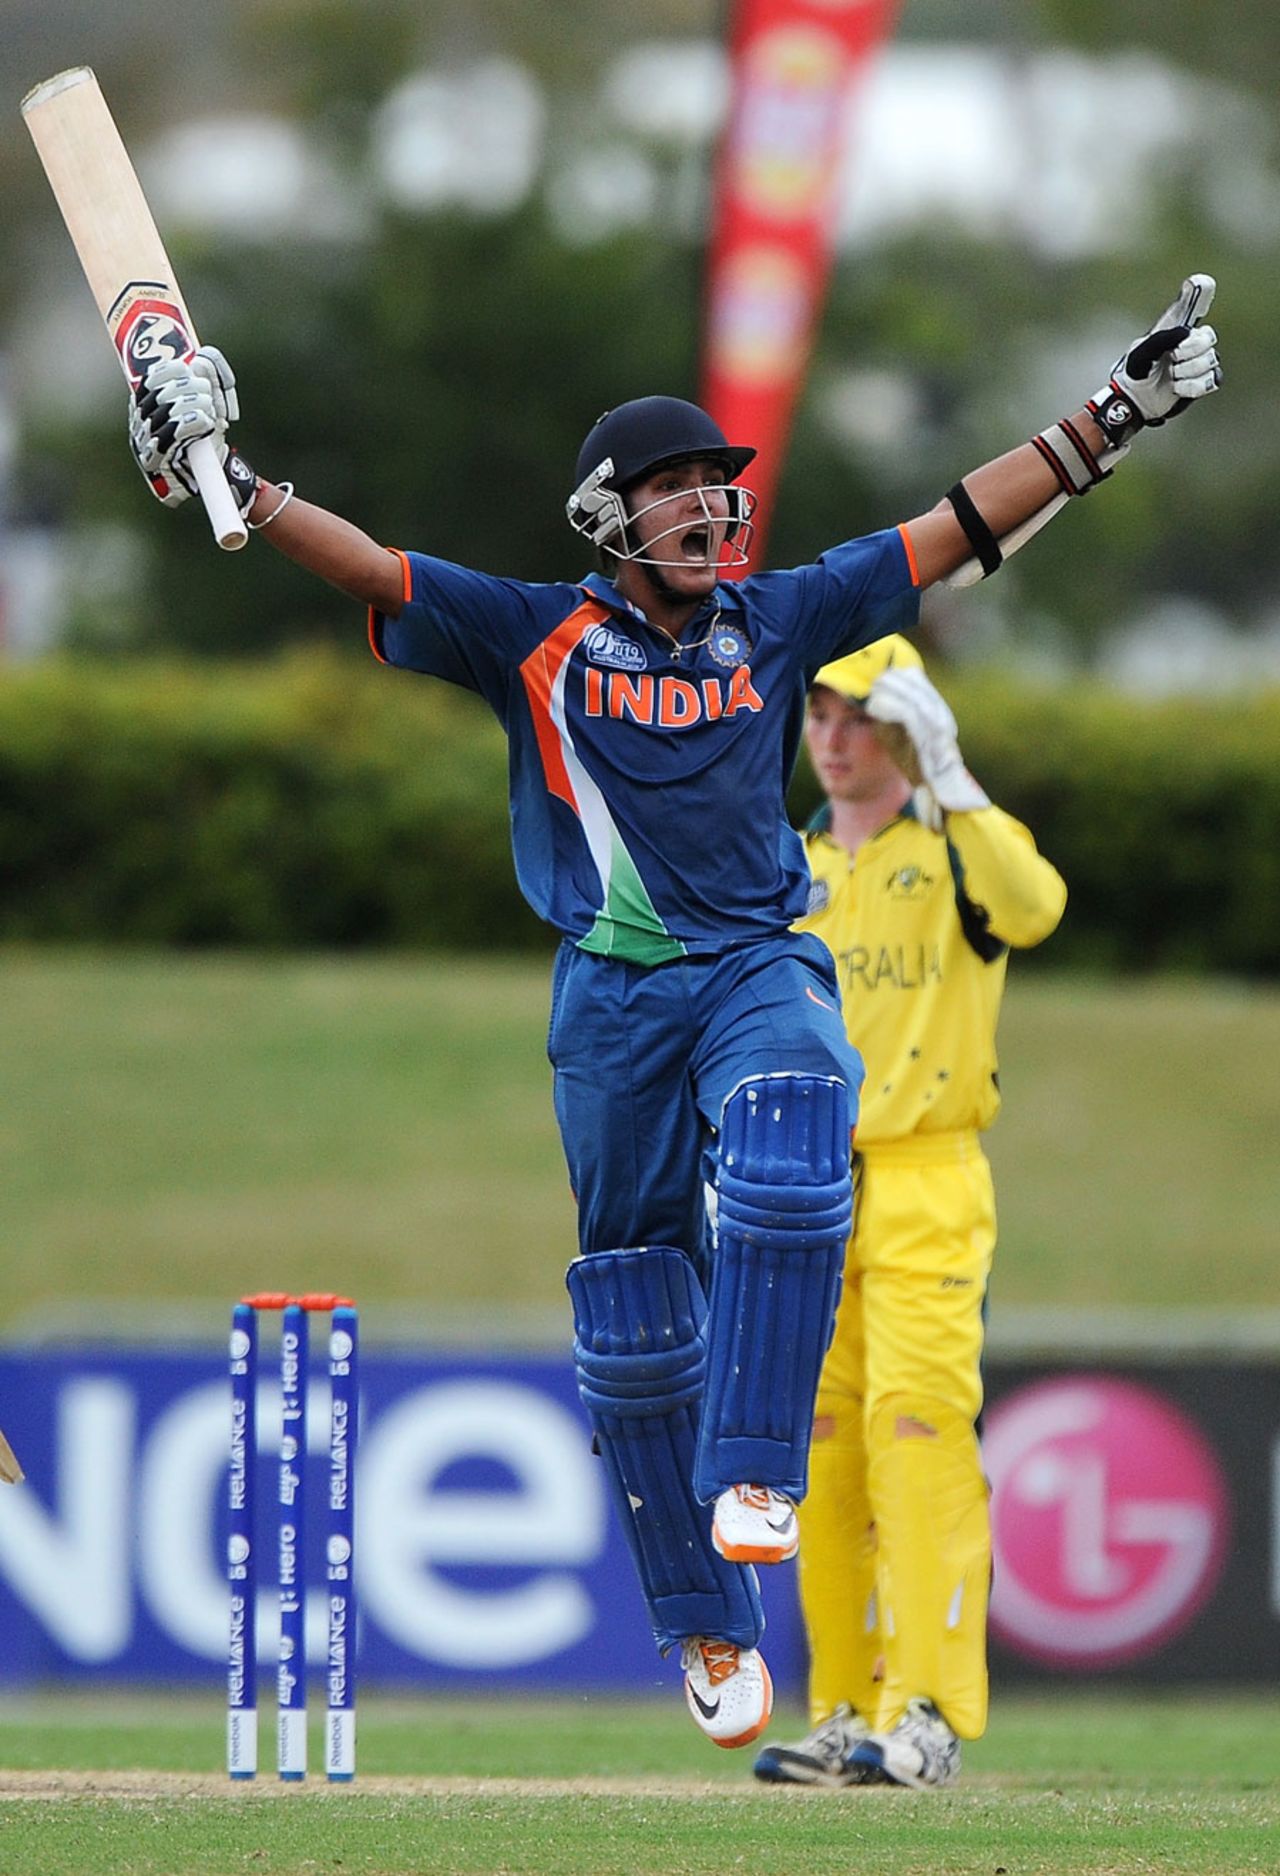 Smit Patel roars after the winning runs are hit, Australia v India, ICC U-19 World Cup, final, Townsville, August 26, 2012